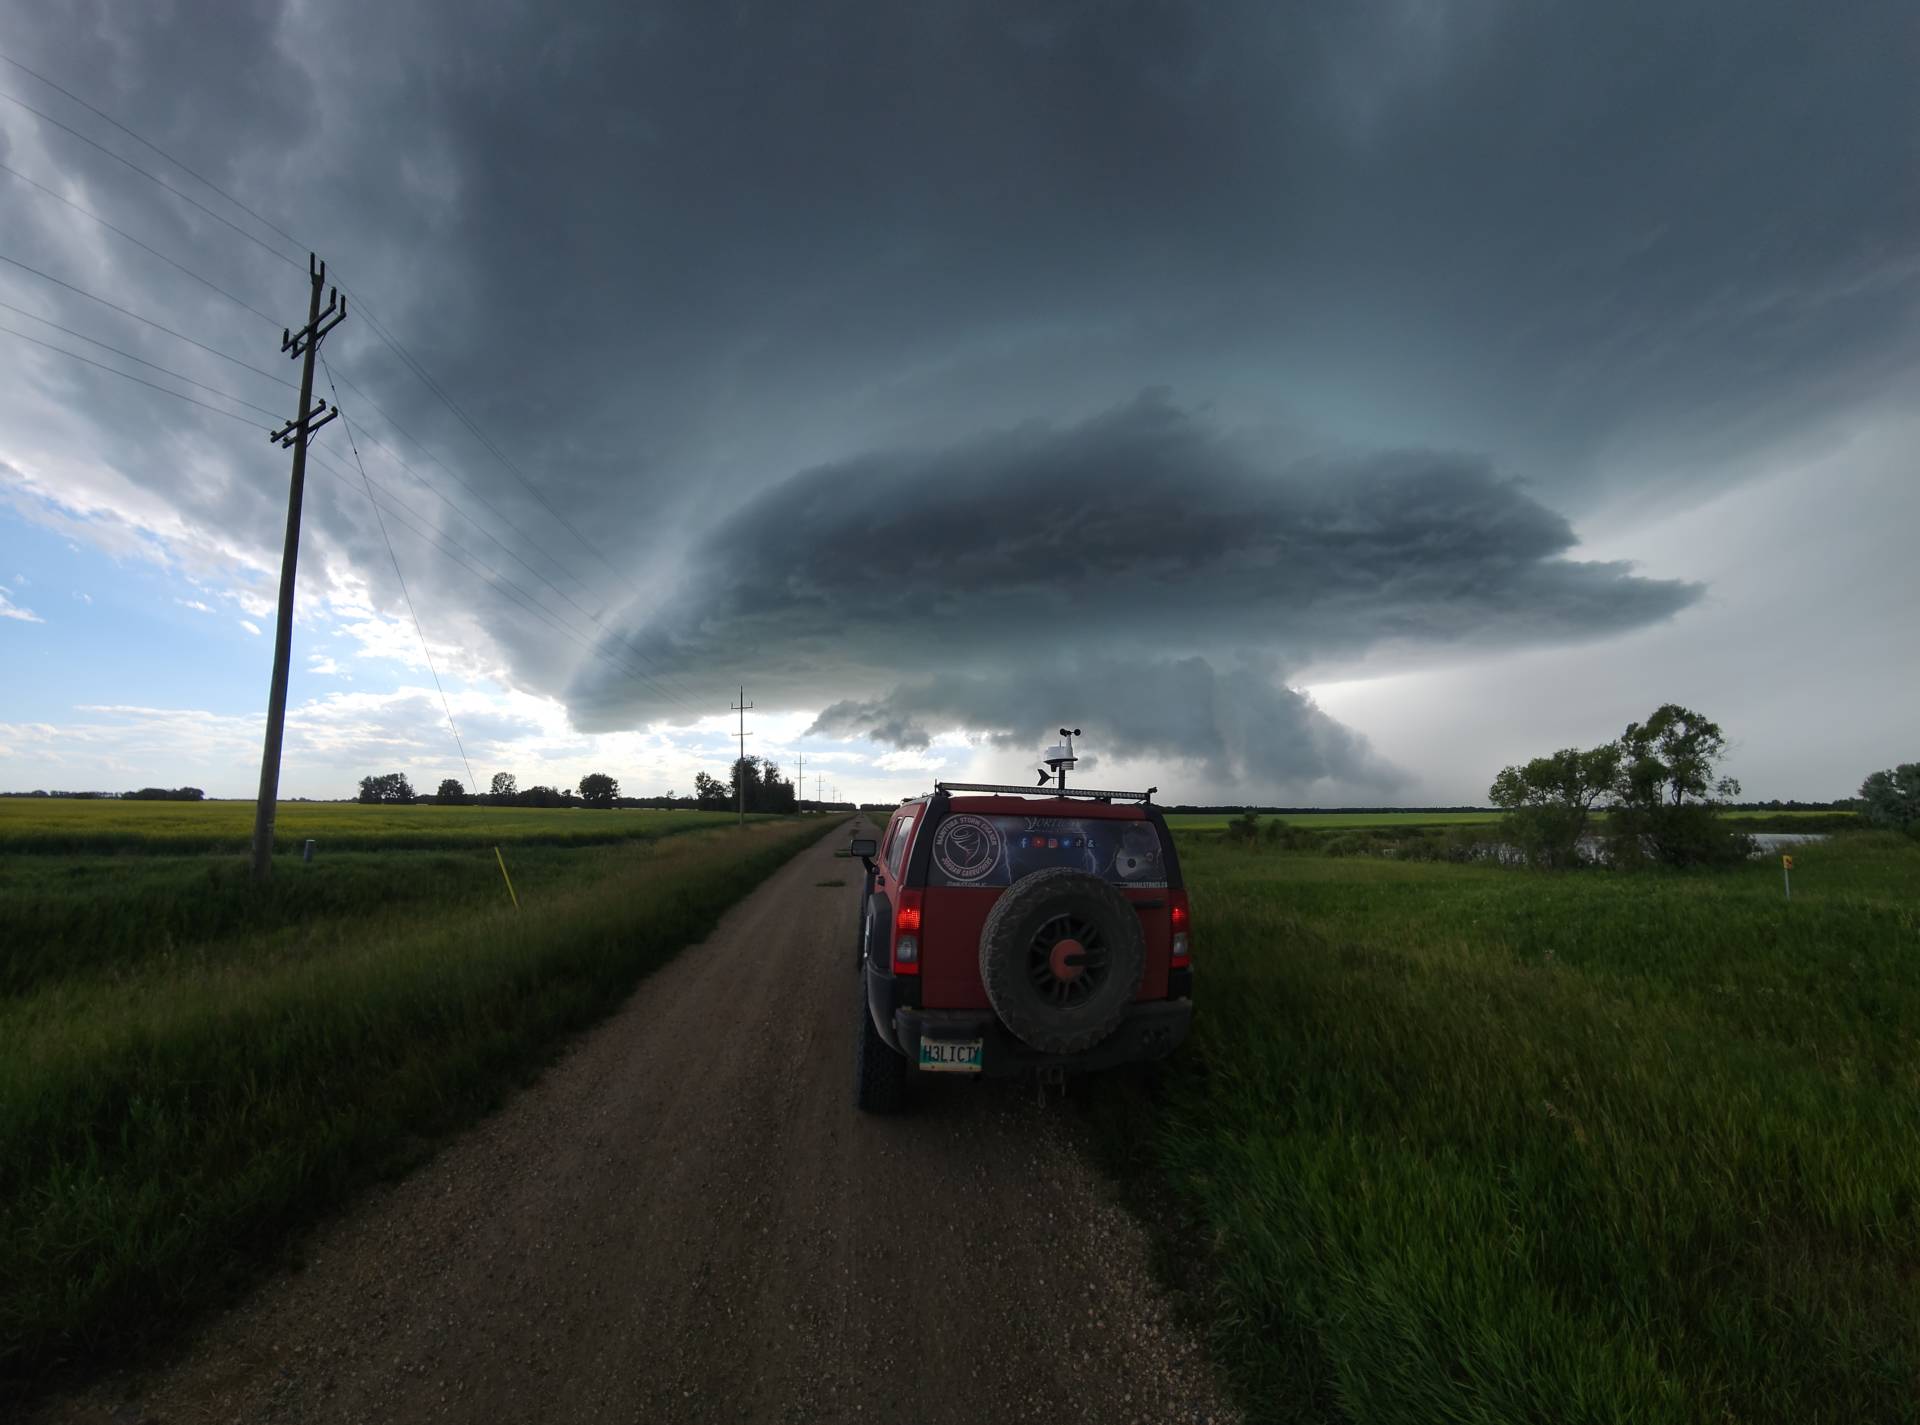 INCREDIBLE structure on this storm coming over Gladstone, Manitoba 05:18 PM @ECCCWeatherMB #MBwx #MBstorm